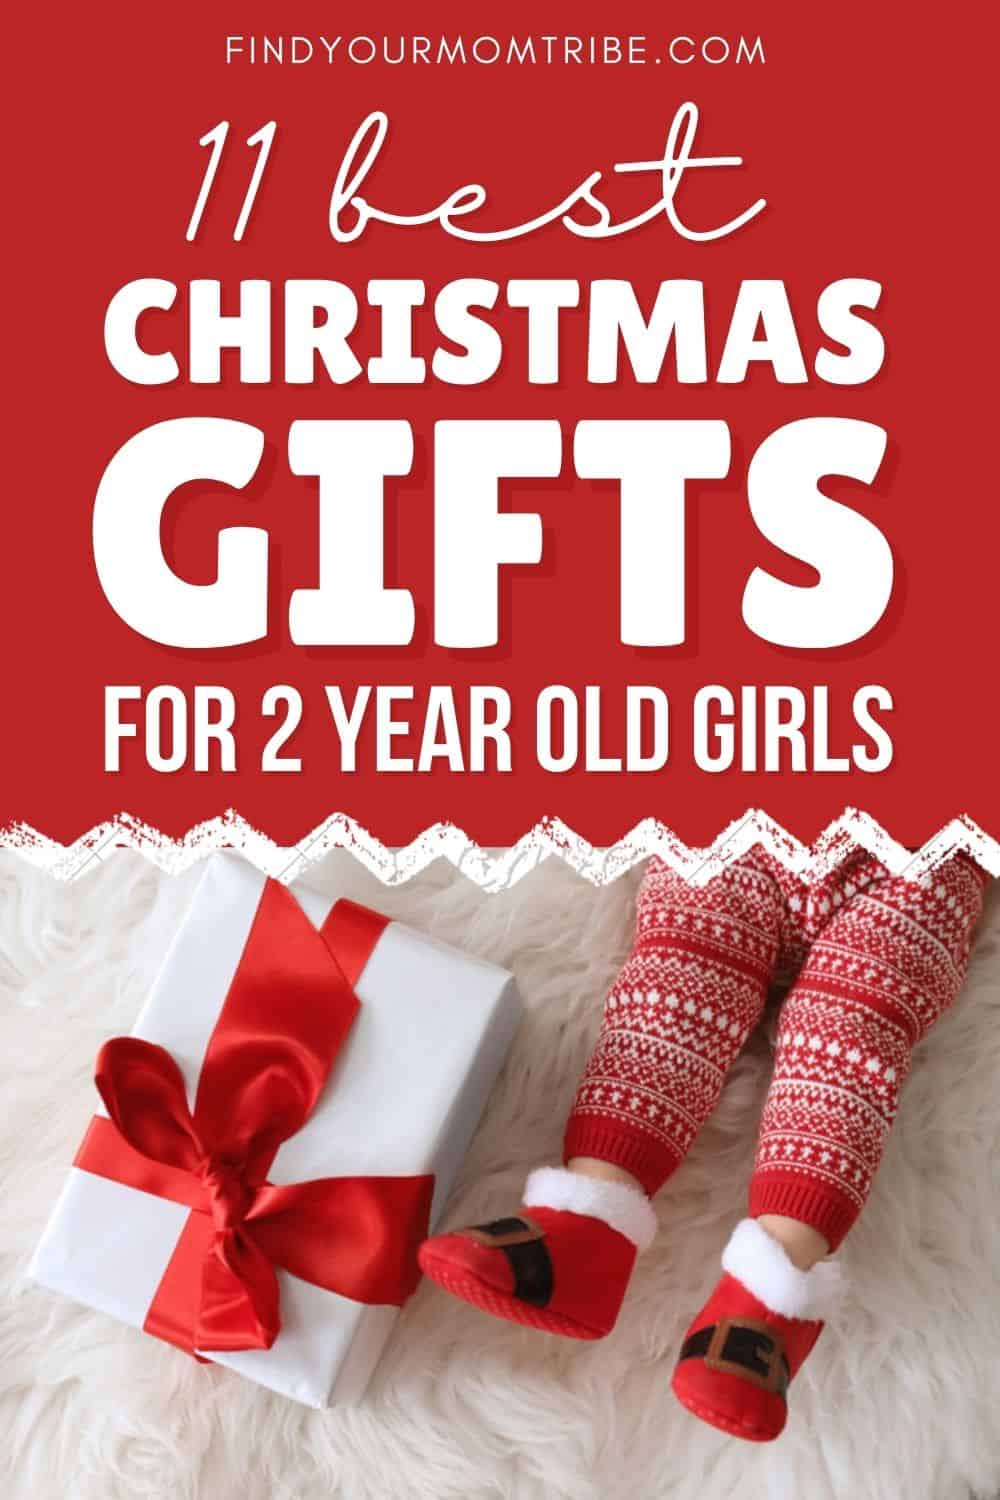 11 Best Christmas Gifts For 2 Year Old Girls In 2020